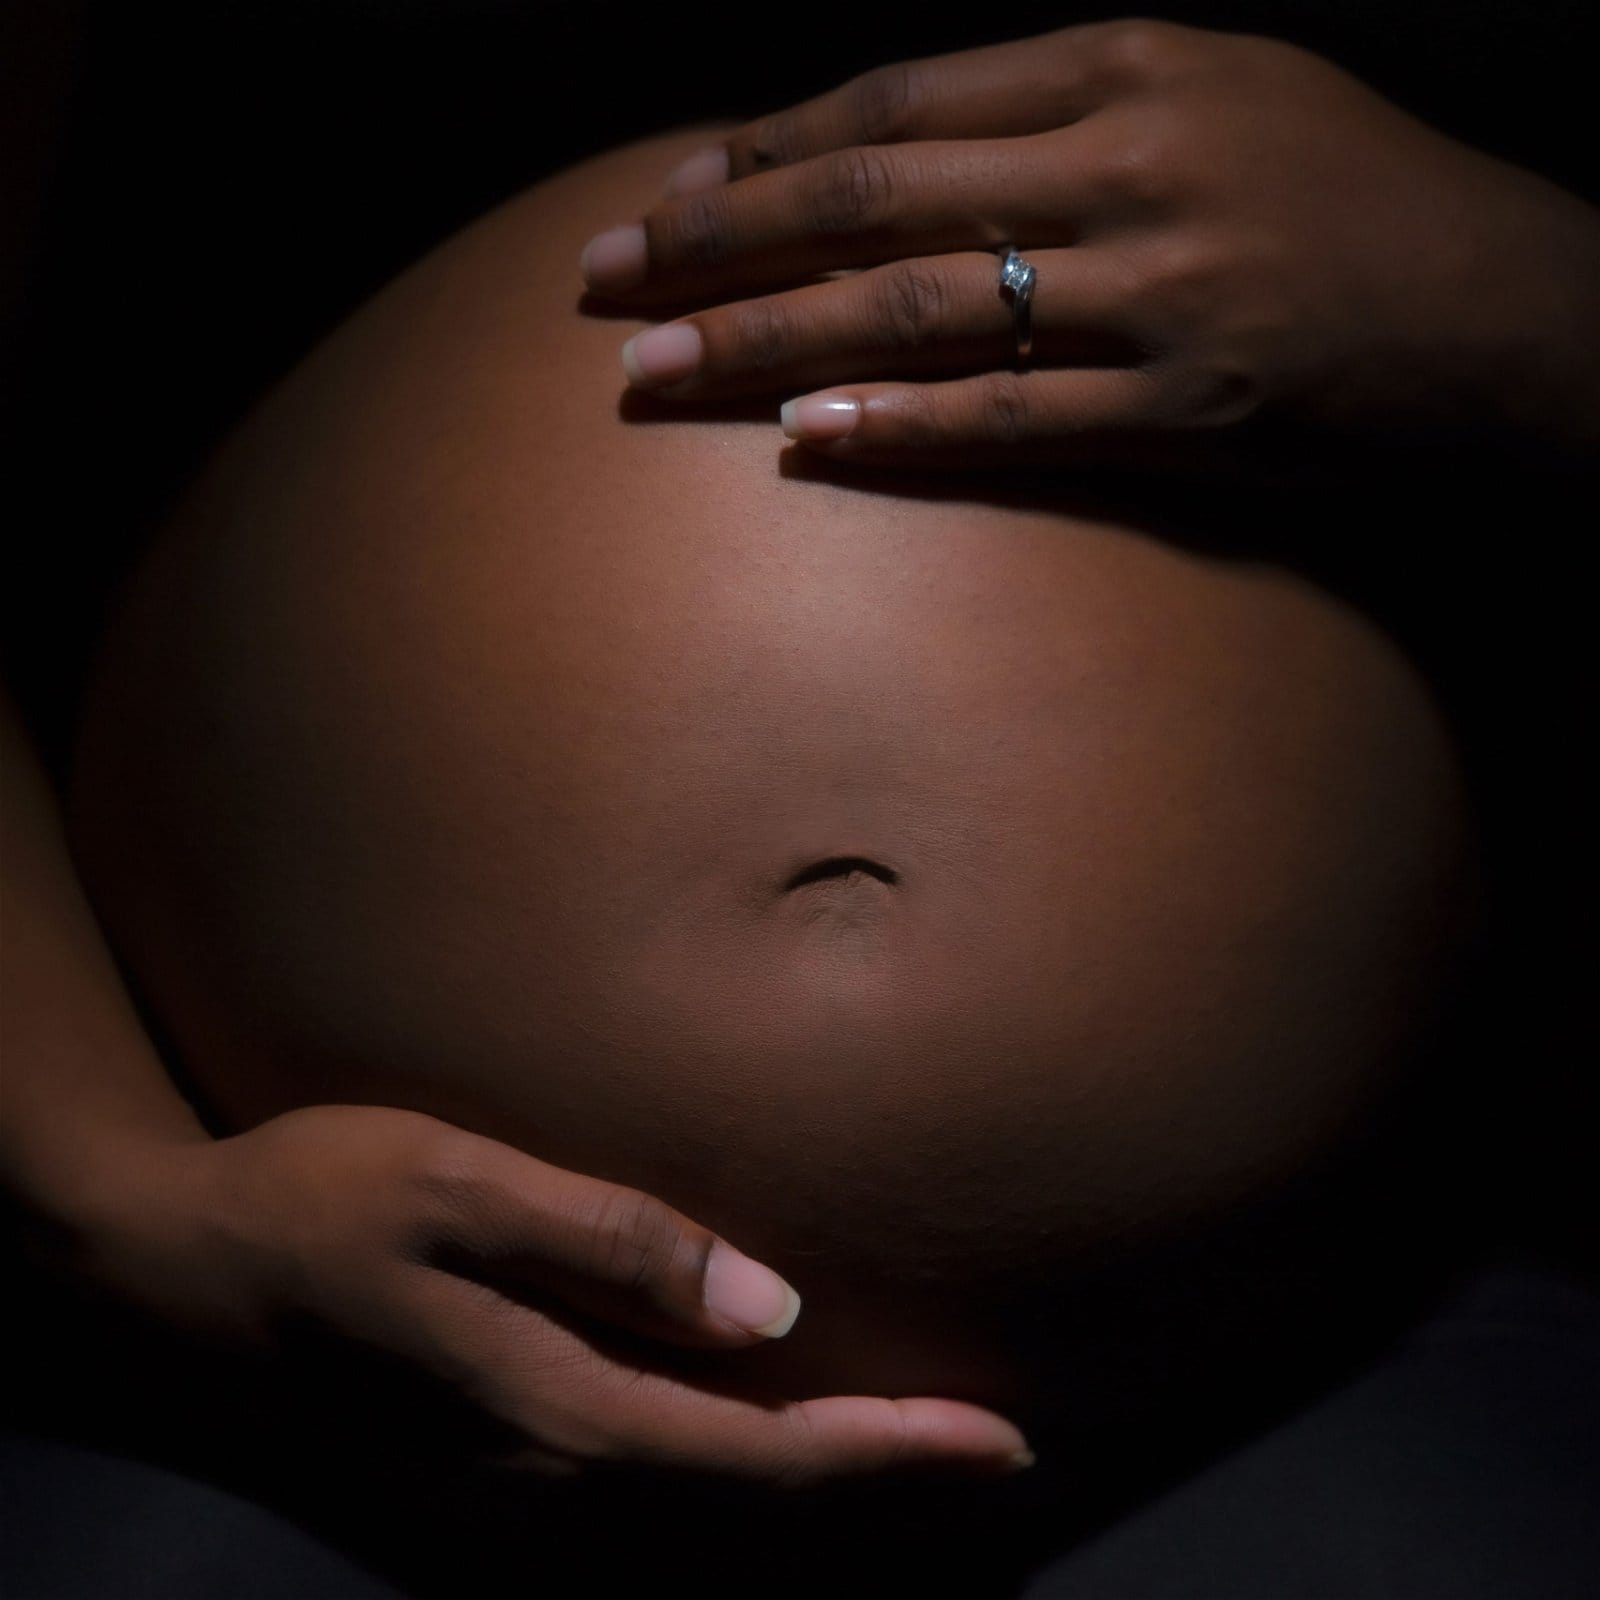 Black women are 60% more likely to suffer from high blood pressure while pregnant. 